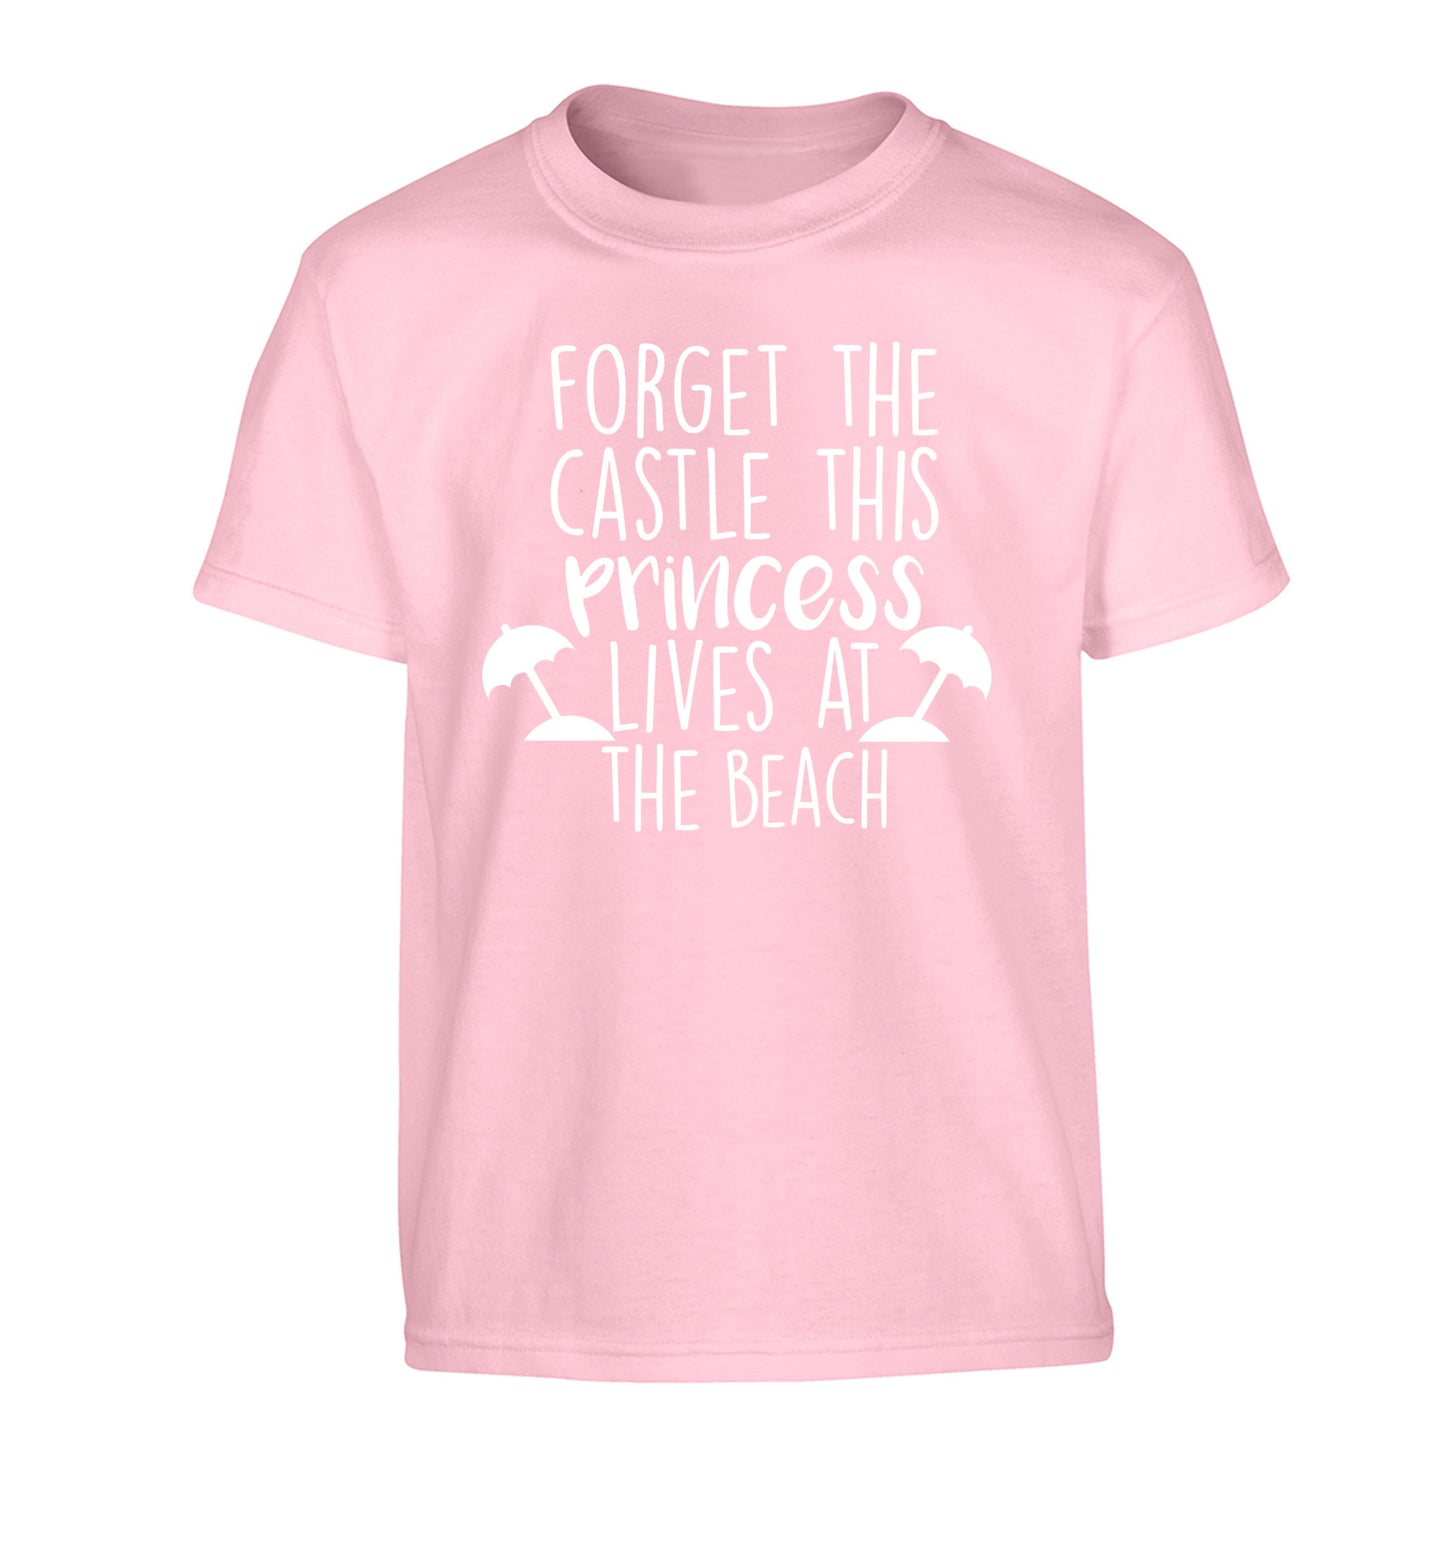 Forget the castle this princess lives at the beach Children's light pink Tshirt 12-14 Years